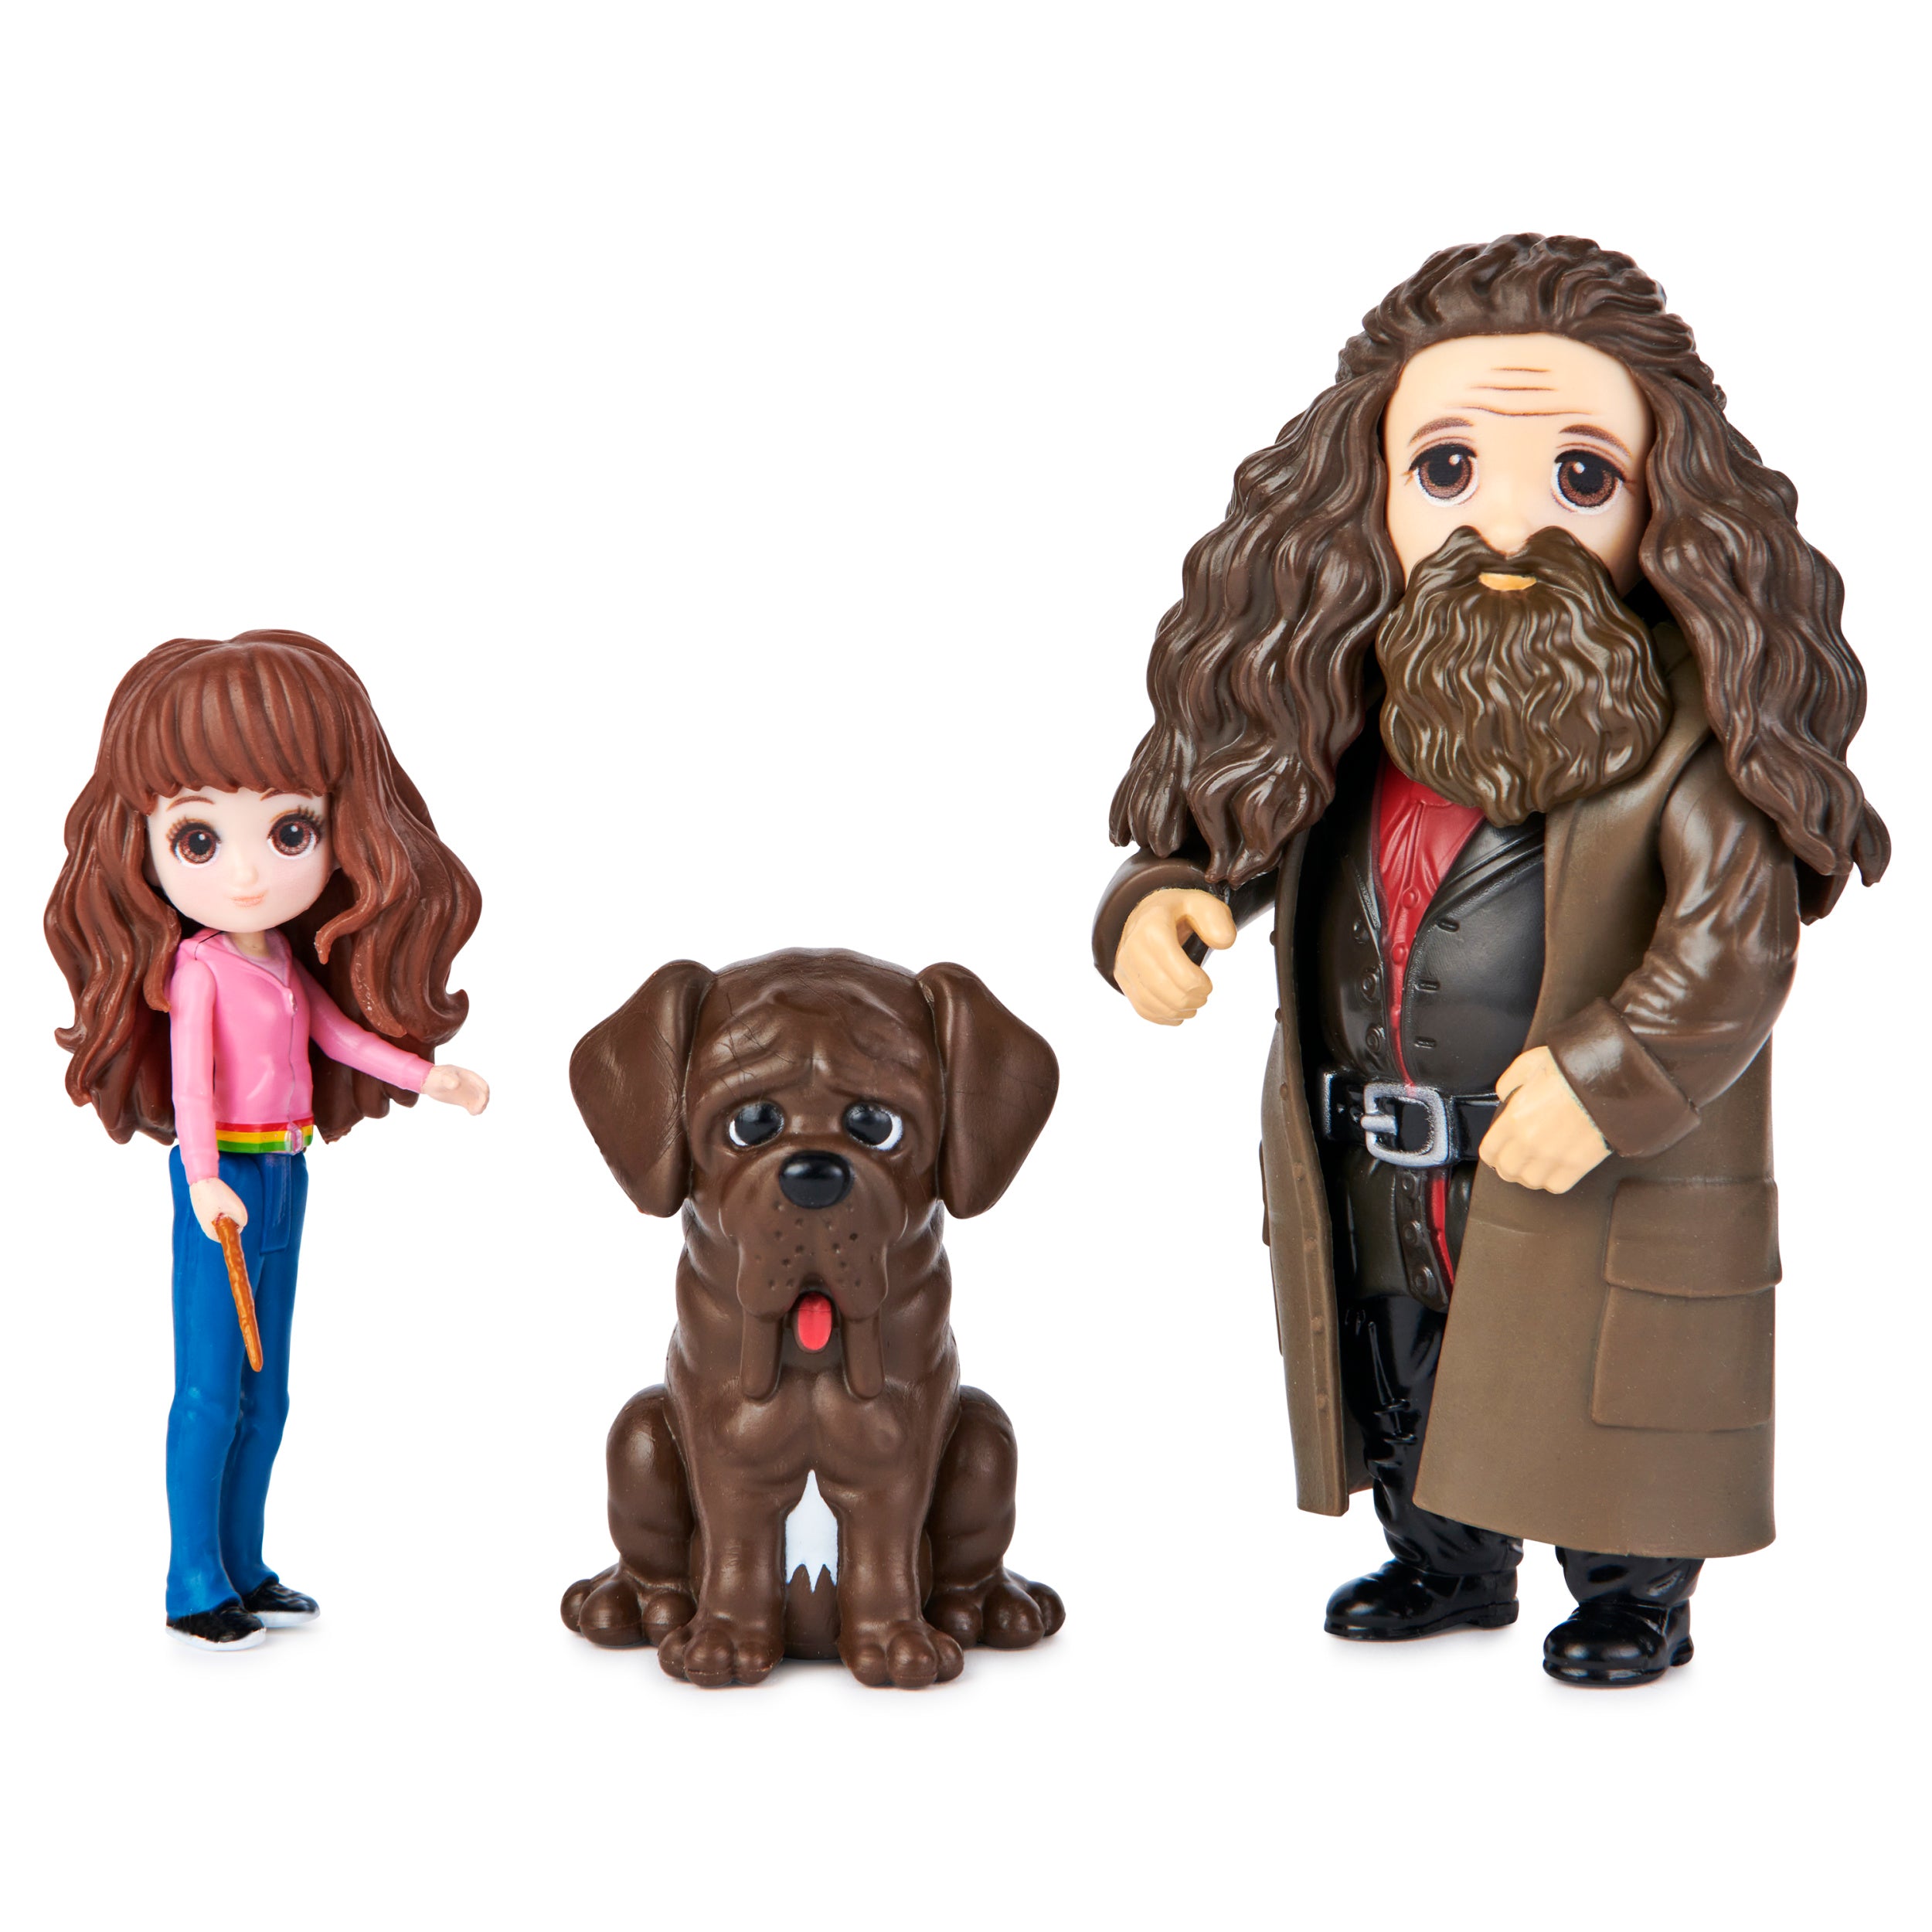 Wizarding World: Harry Potter Mini Pack Figuras Magicas - Hermione Y Hagrid